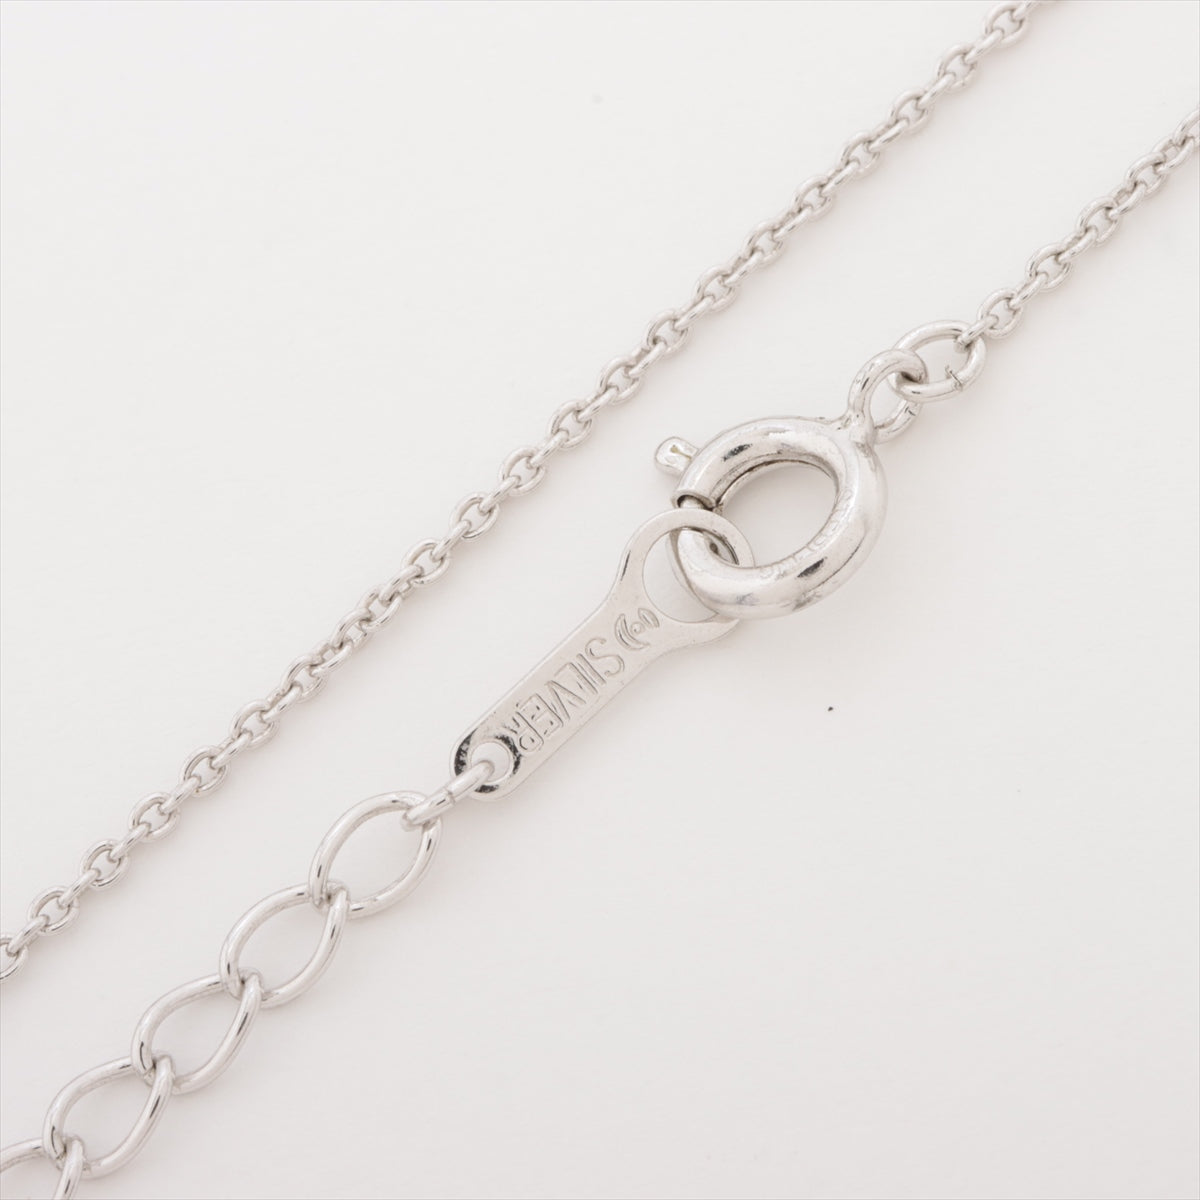 TASAKI Pearl Necklace SV 2.7g Approx. 4.5mm